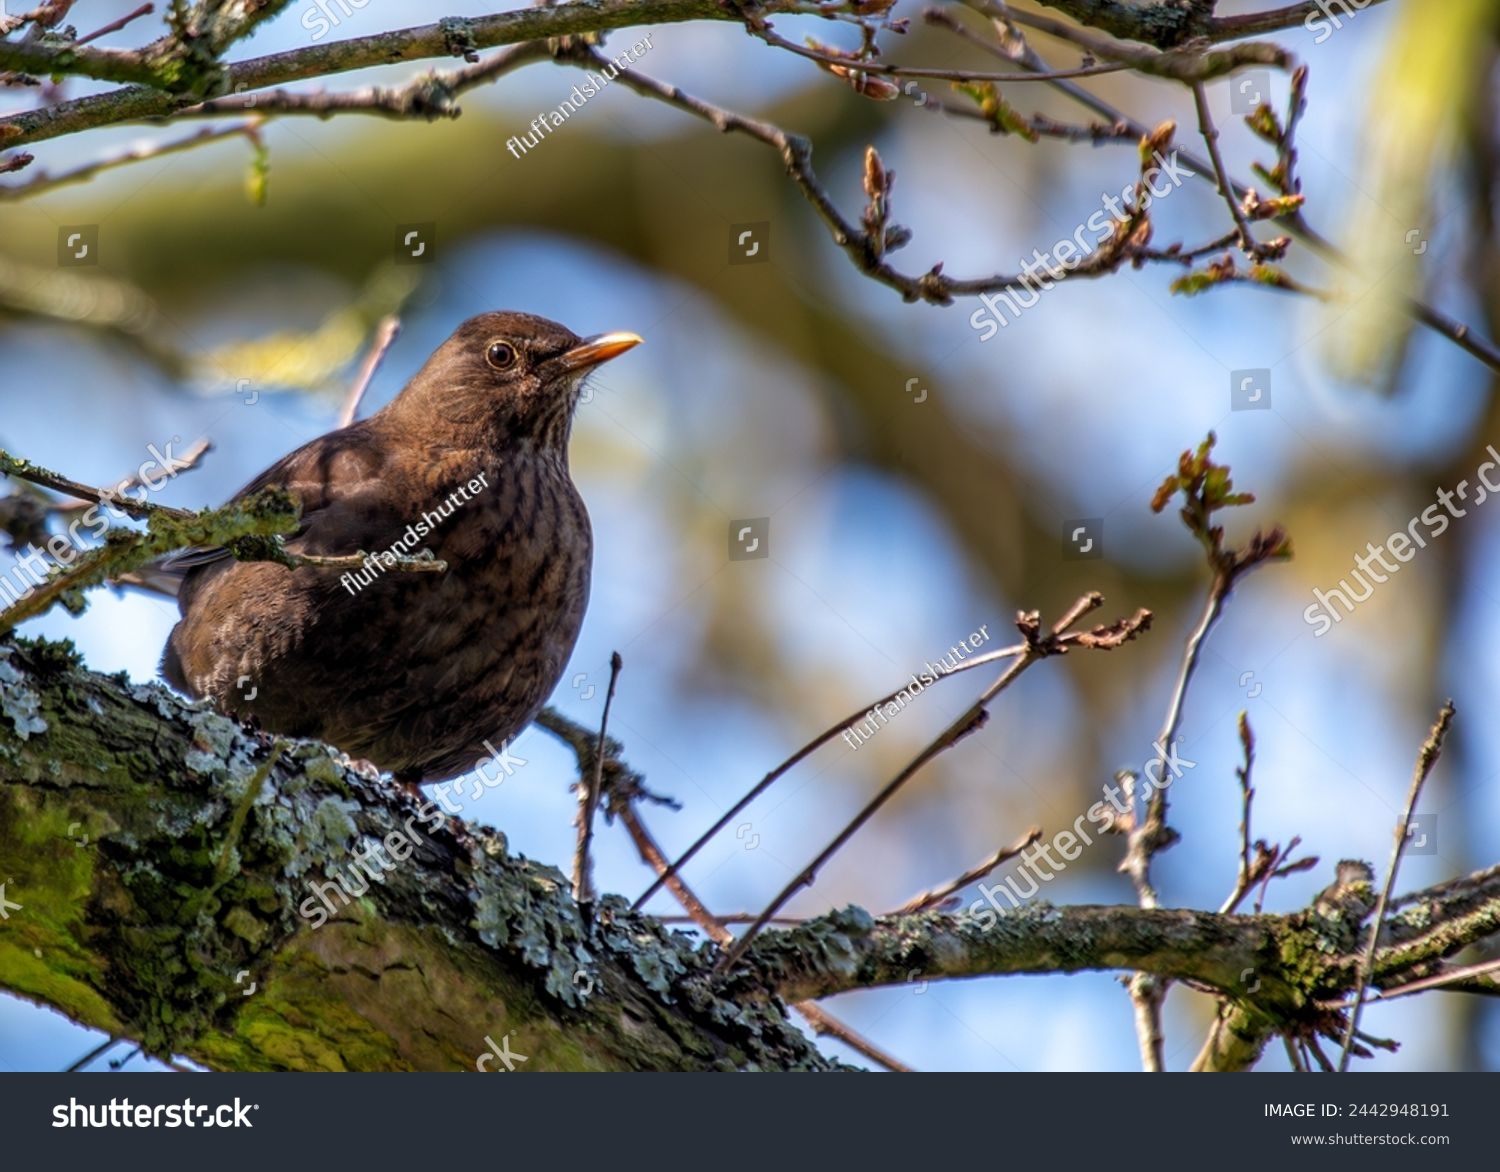 Female Blackbird with dark brown plumage searches for food amongst the trees of St. James's Park, London.  #2442948191